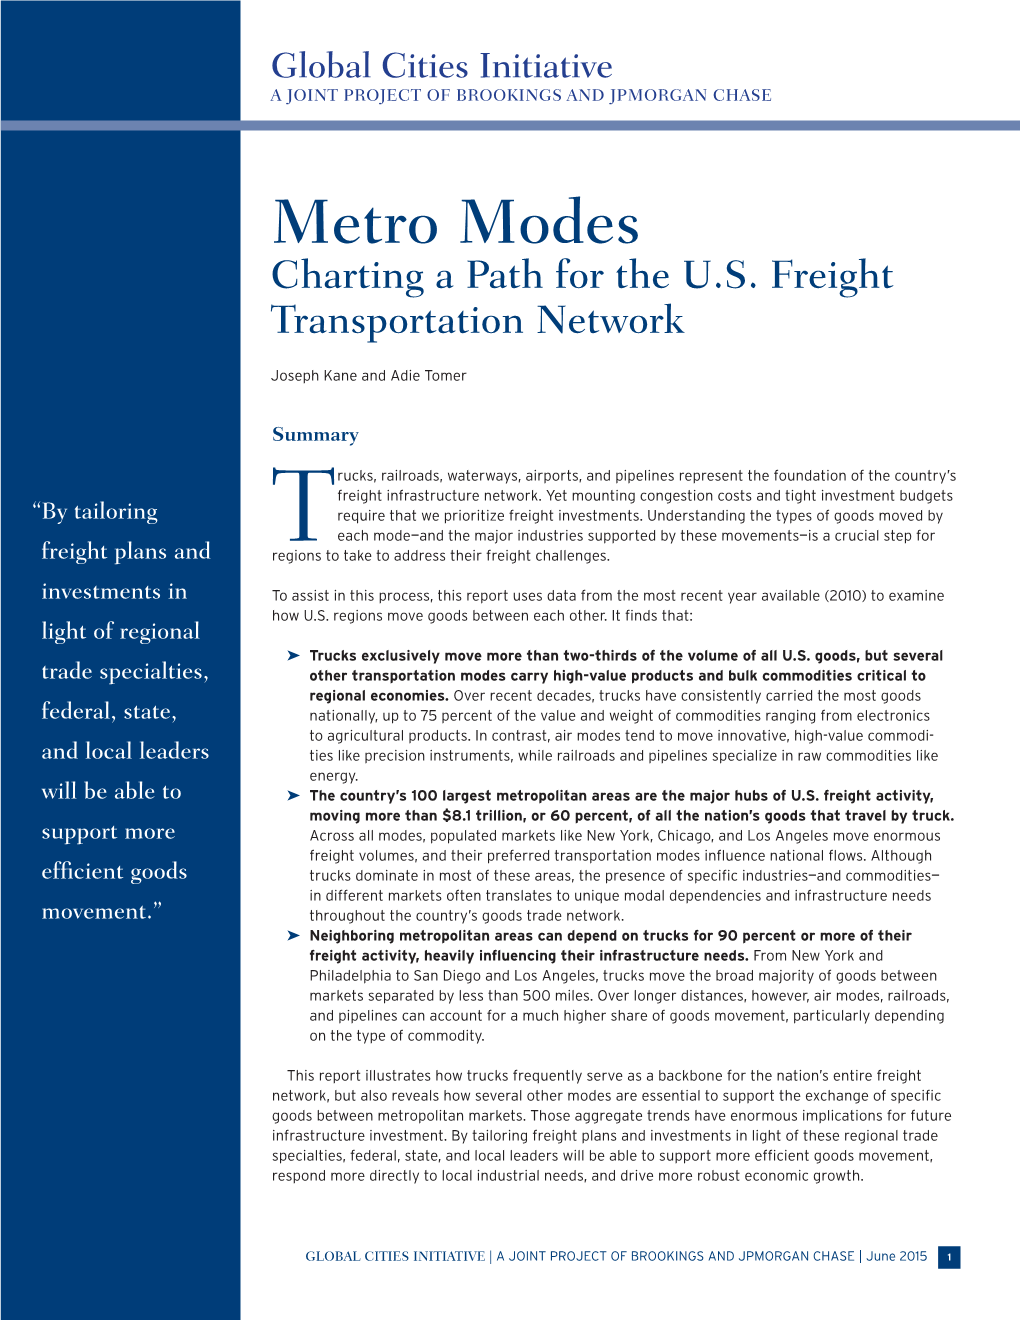 Metro Modes: Charting a Path for the U.S. Freight Transportation Network